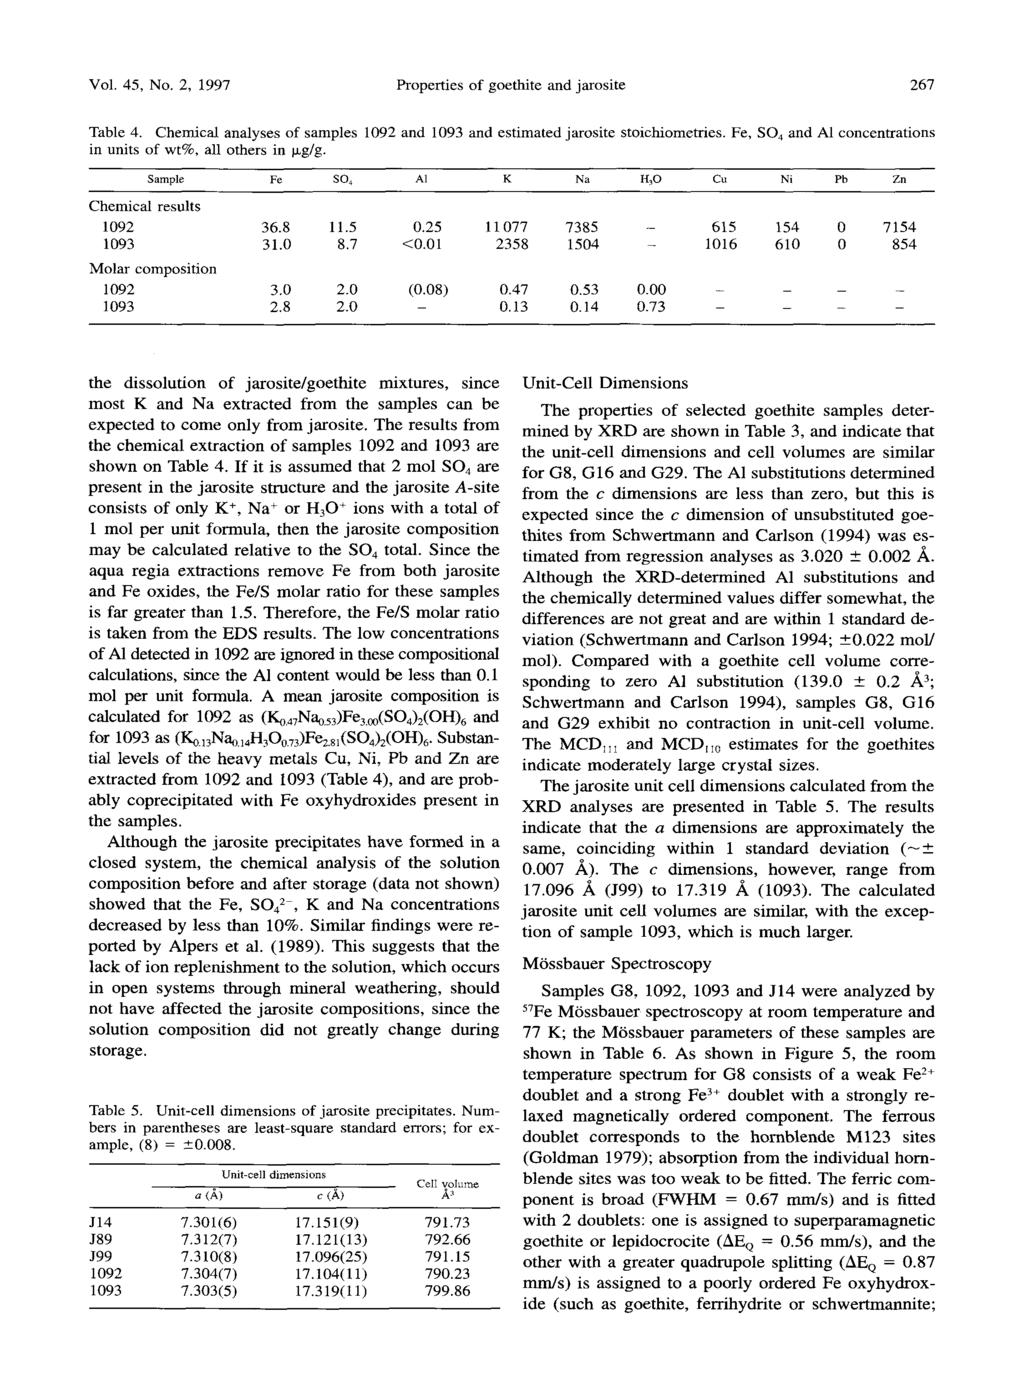 Vol. 45, No. 2, 1997 Properties of goethite and jarosite 267 Table 4. Chemical analyses of samples 1092 and 1093 and estimated jarosite stoichiometries.